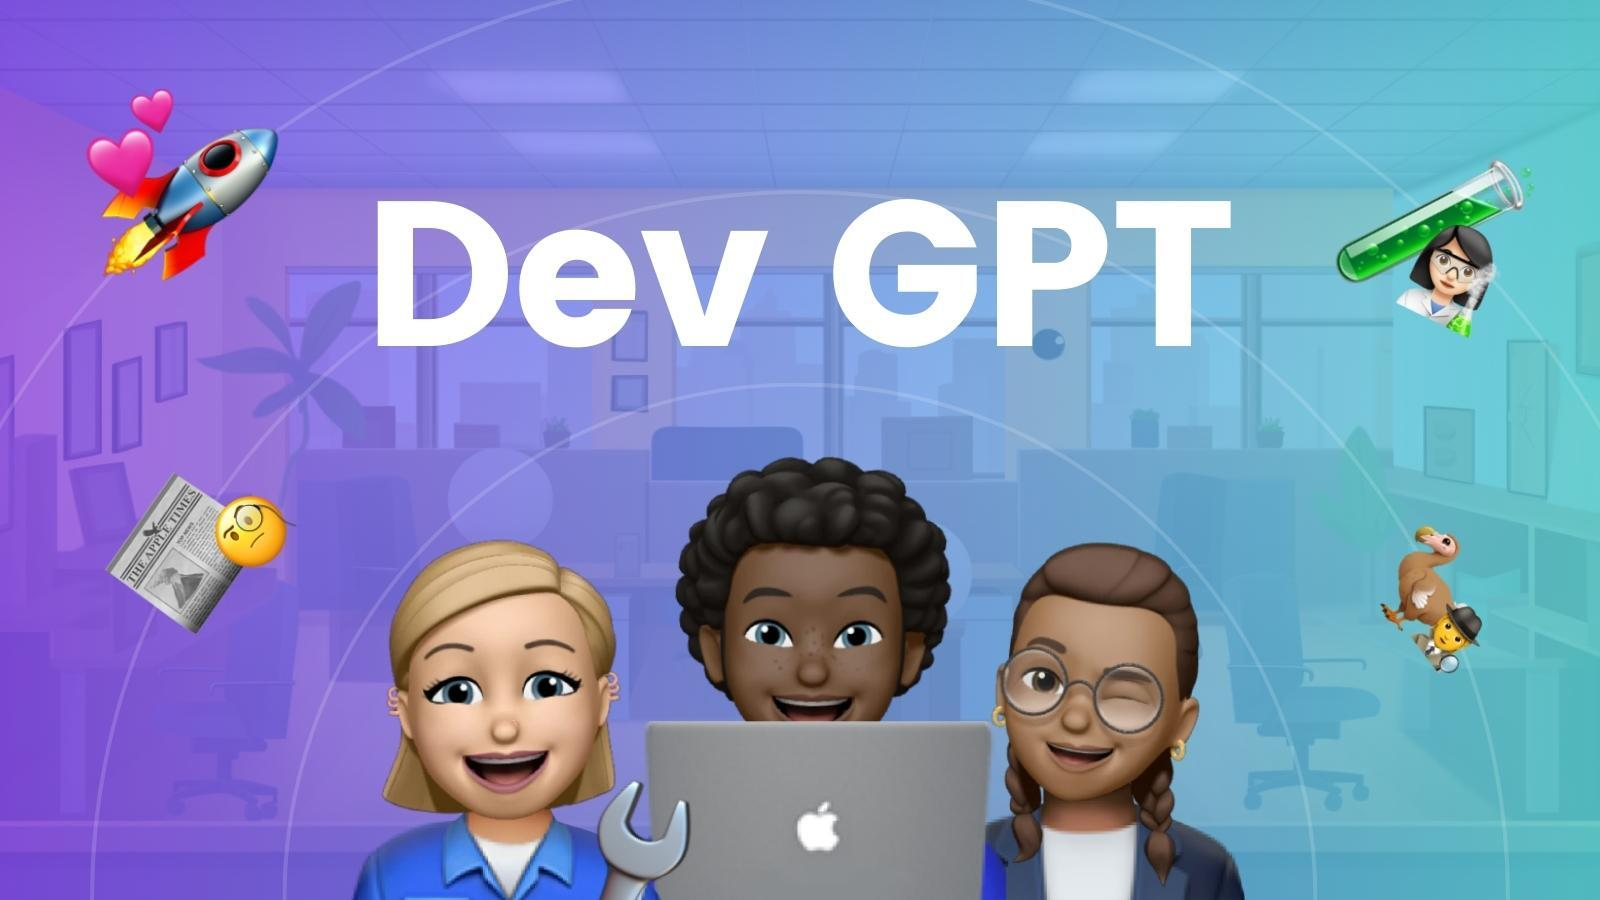 Banner for Apple's Dev GPT featuring cheerful stick figure emojis, a rocket, tools, a test tube, and figures with a laptop